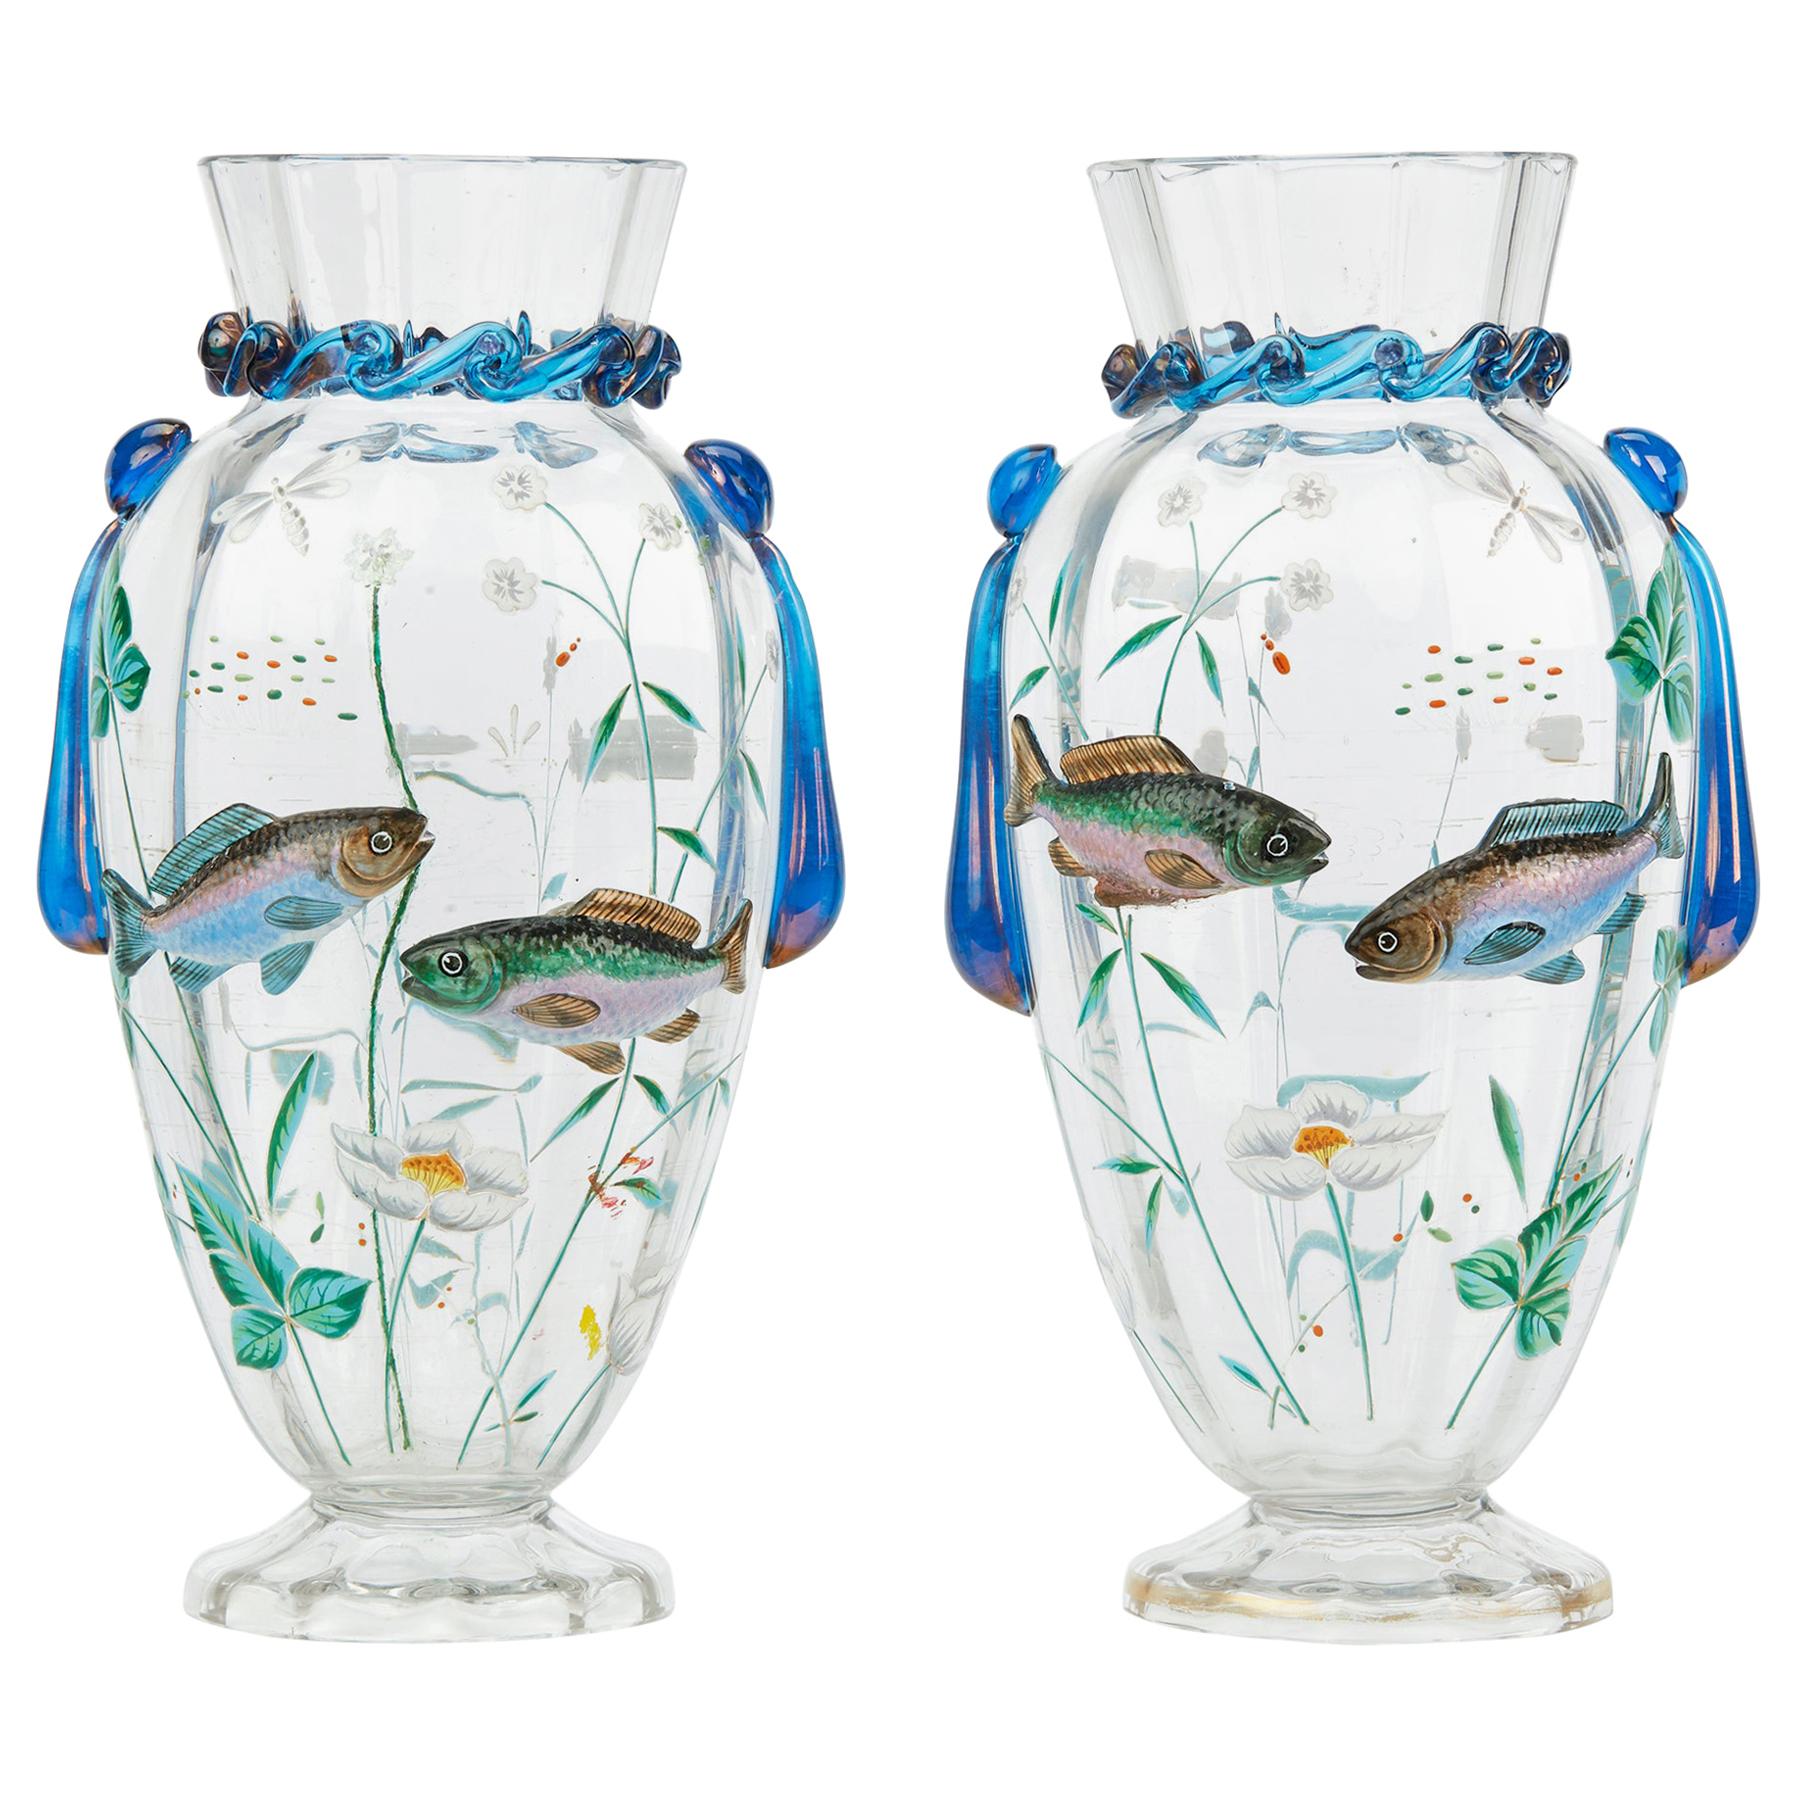 Pair of Bohemian Harrach Art Glass Vases Applied with Fish, circa 1900